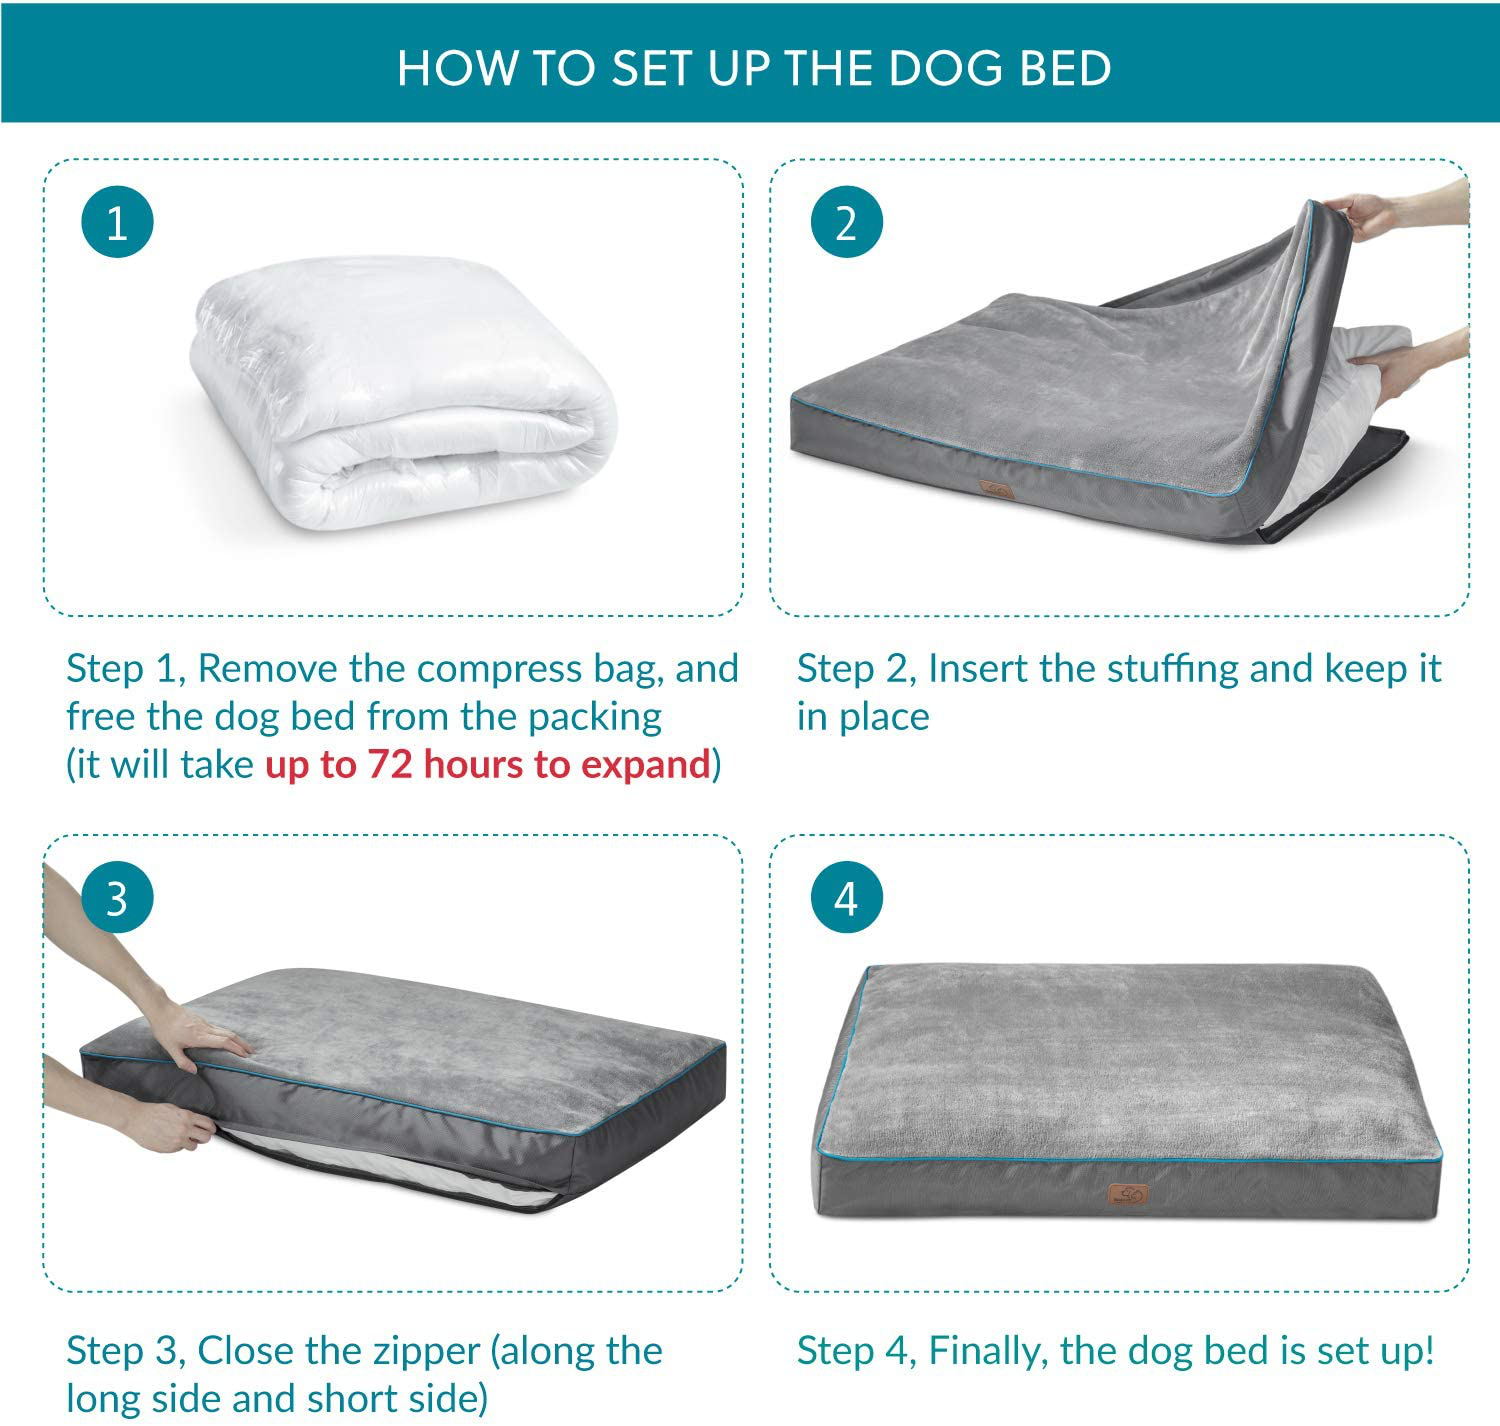 Bedsure Waterproof Dog Beds for Large Dogs - Large Dog Bed with Washable Cover, Pet Bed Mat Pillows for Medium, Extra Large Dogs